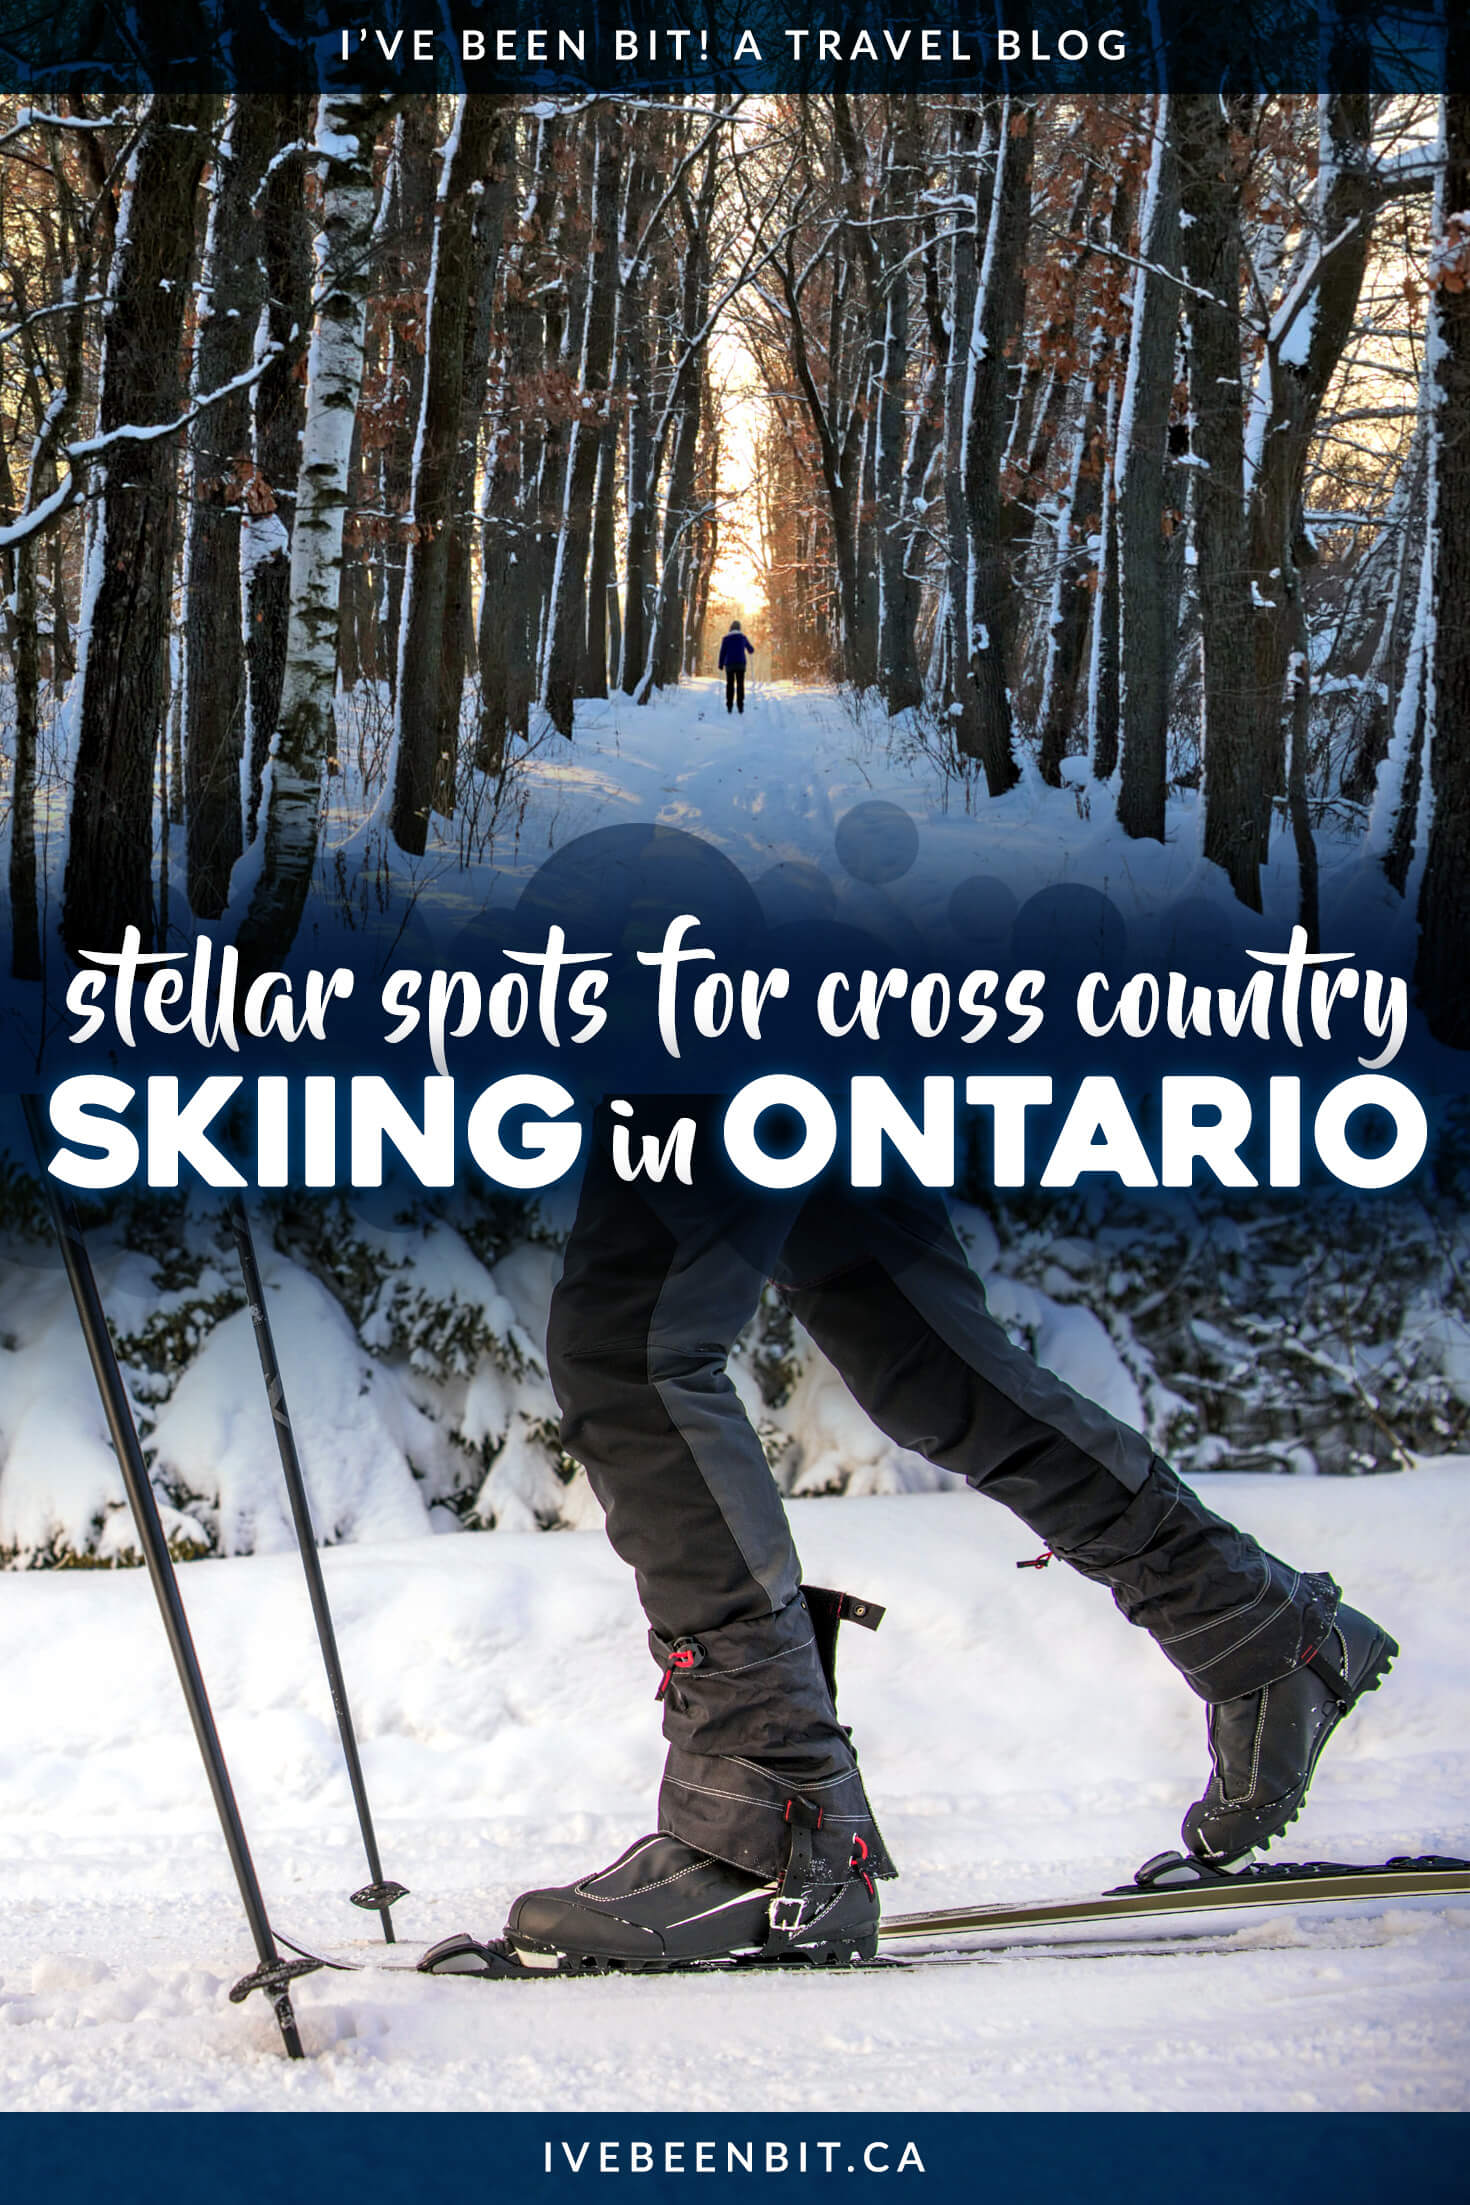 Looking for a way to enjoy winter in Ontario? Give cross country skiing a go! Check out these top spots for cross country skiing in Ontario that are perfect for all skill levels. | Ontario Winter Getaway | Winter Ontario Canada | Ontario Winter Travel | Ontario Skiing Destinations | Winter Travel in Ontario | Northern Ontario Cross Country Skiing | Cross Country Skiing Near Toronto | #Winter #Travel #Skiing #CrossCountrySkiing | IveBeenBit.ca